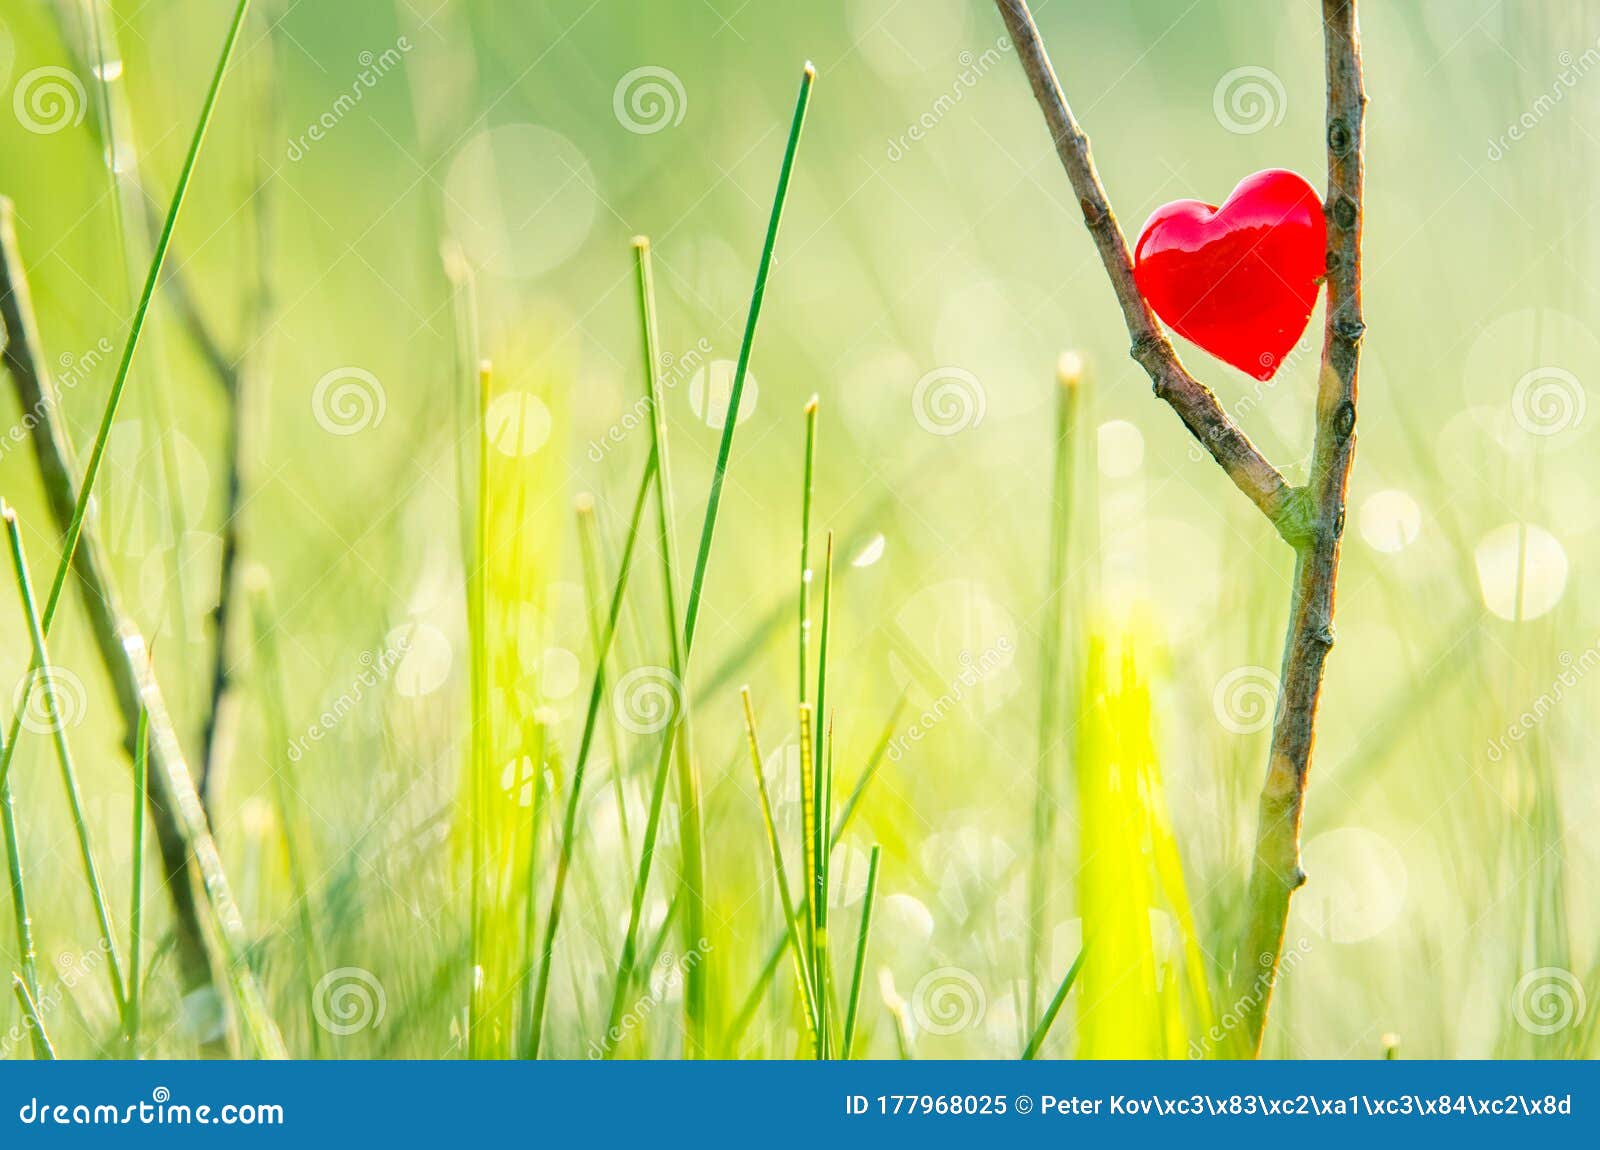 Red Heart in Nature with Wonderful Morning Drops Background and Beautiful  Light. Original Wallpaper or Postcard for Wedding or Stock Image - Image of  love, closeup: 177968025